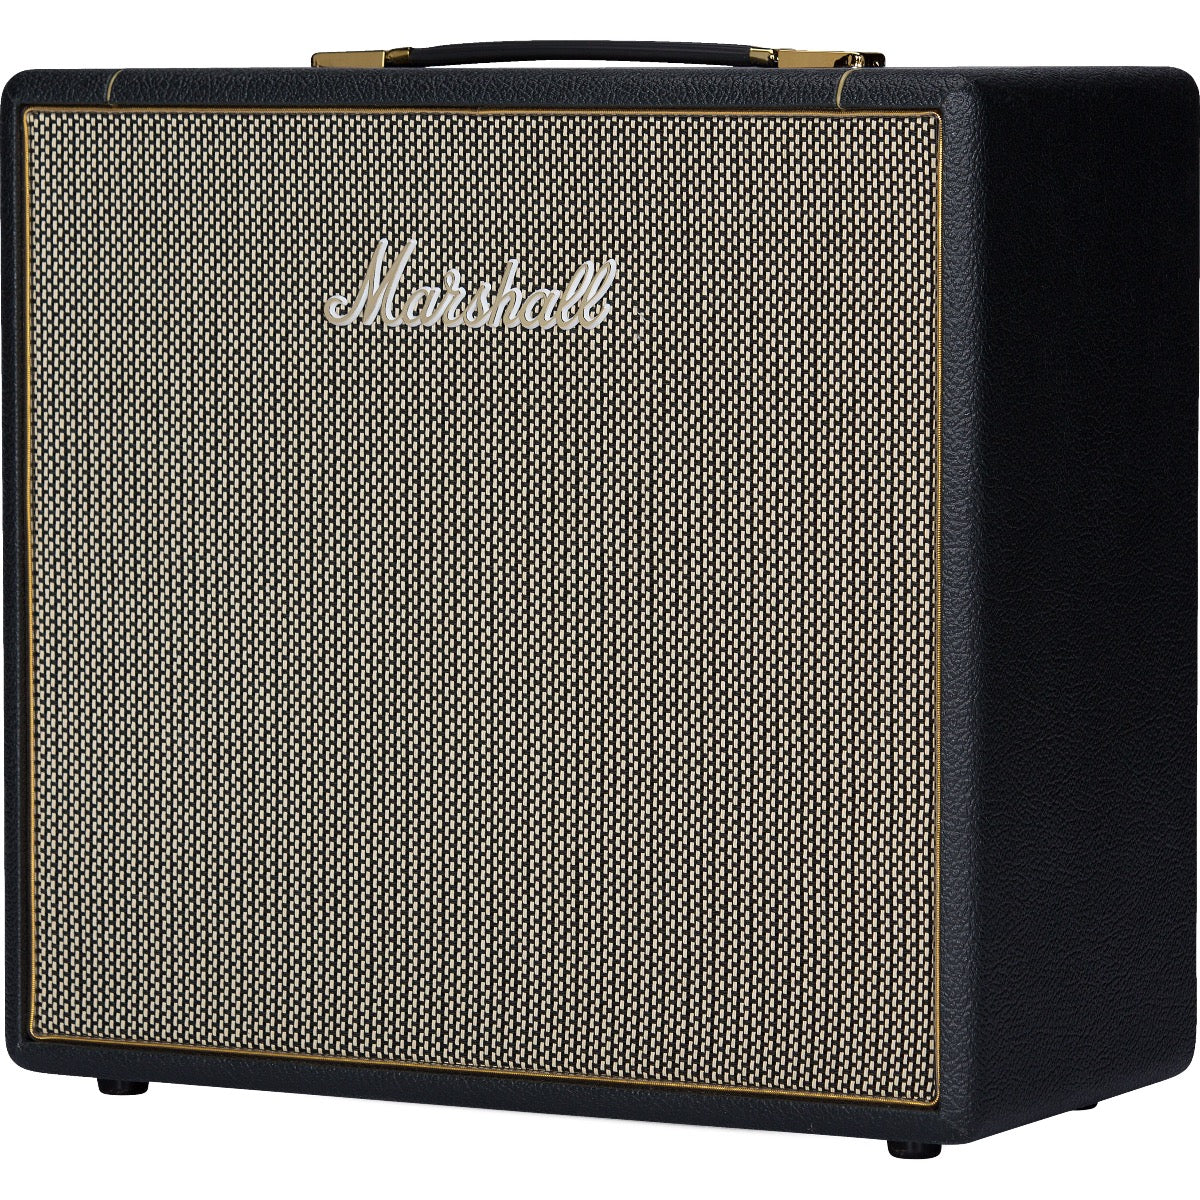 Perspective view of Marshall SV112 Studio Vintage 1x12 Speaker Cabinet showing front and right side